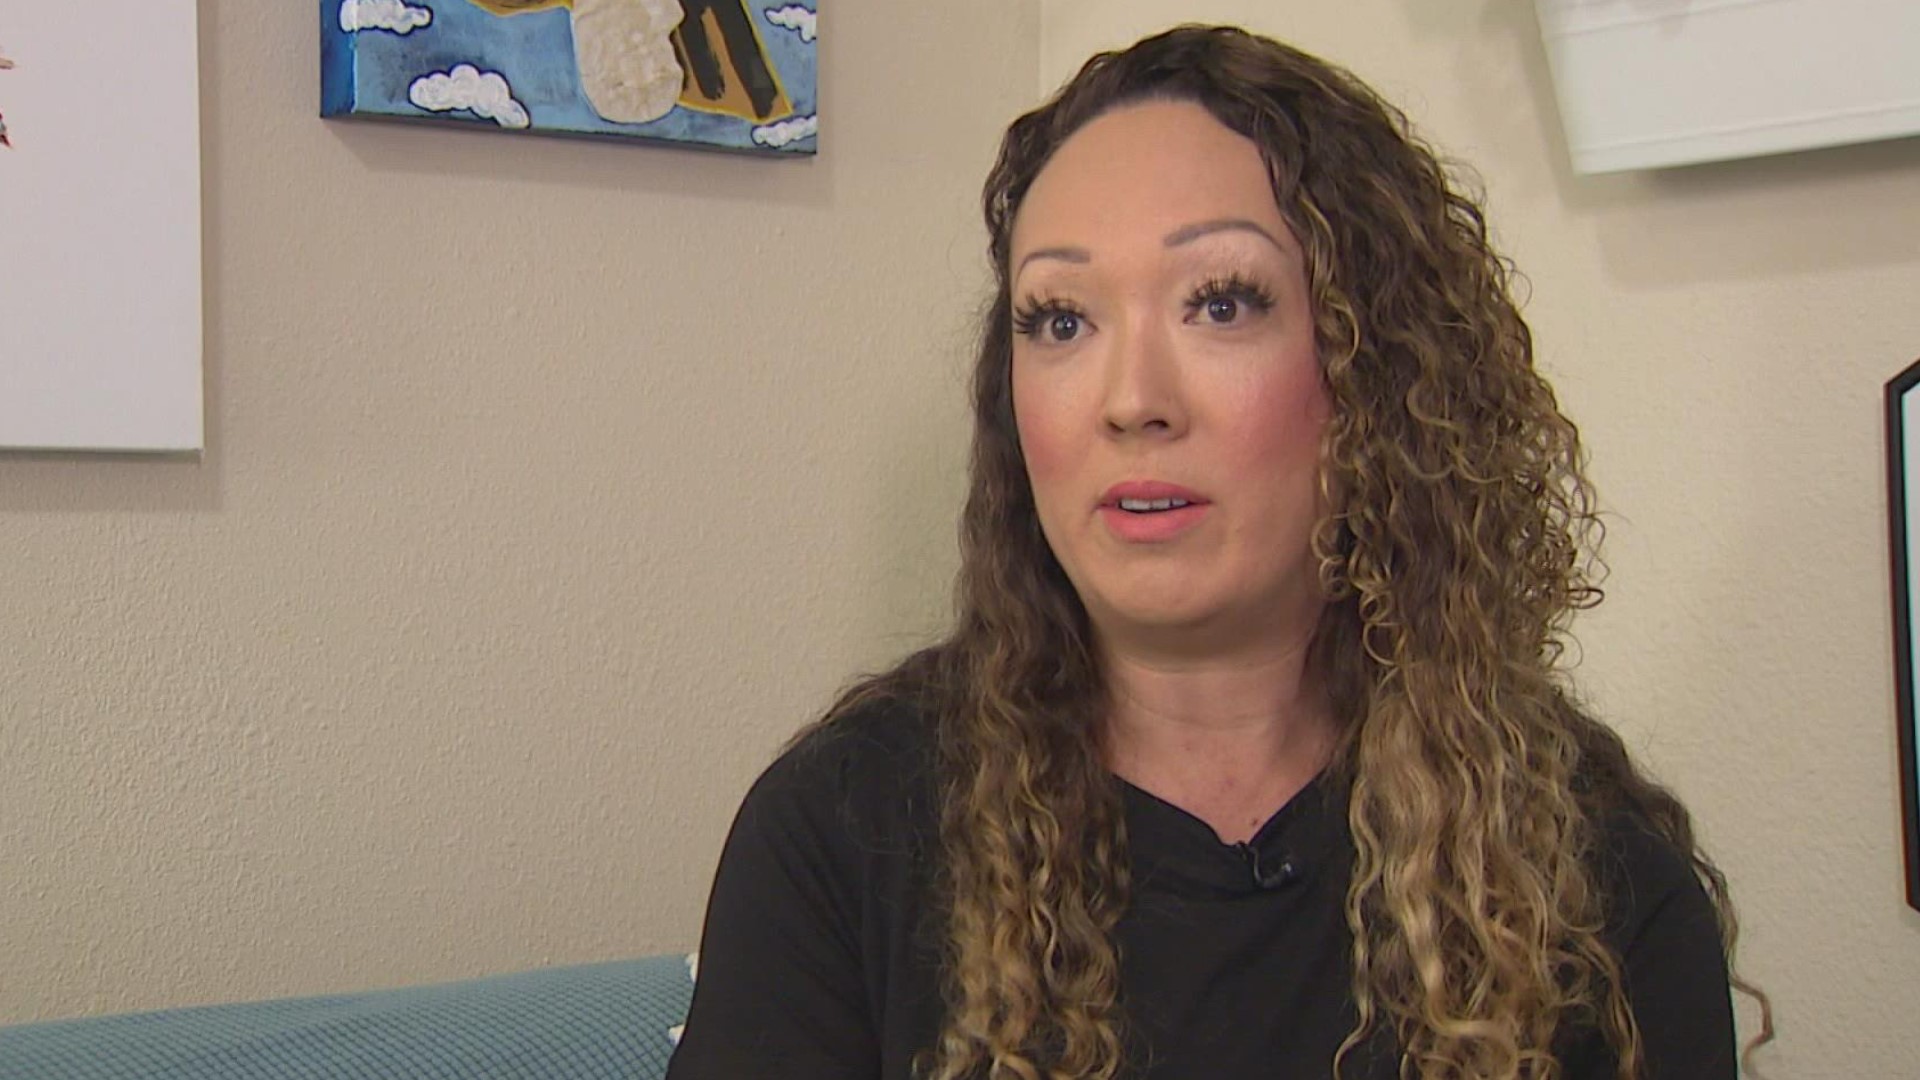 Tacoma parent Maile Smith said she isn’t against vaccinations but believes there isn’t enough data available to feel comfortable receiving the COVID-19 vaccine.